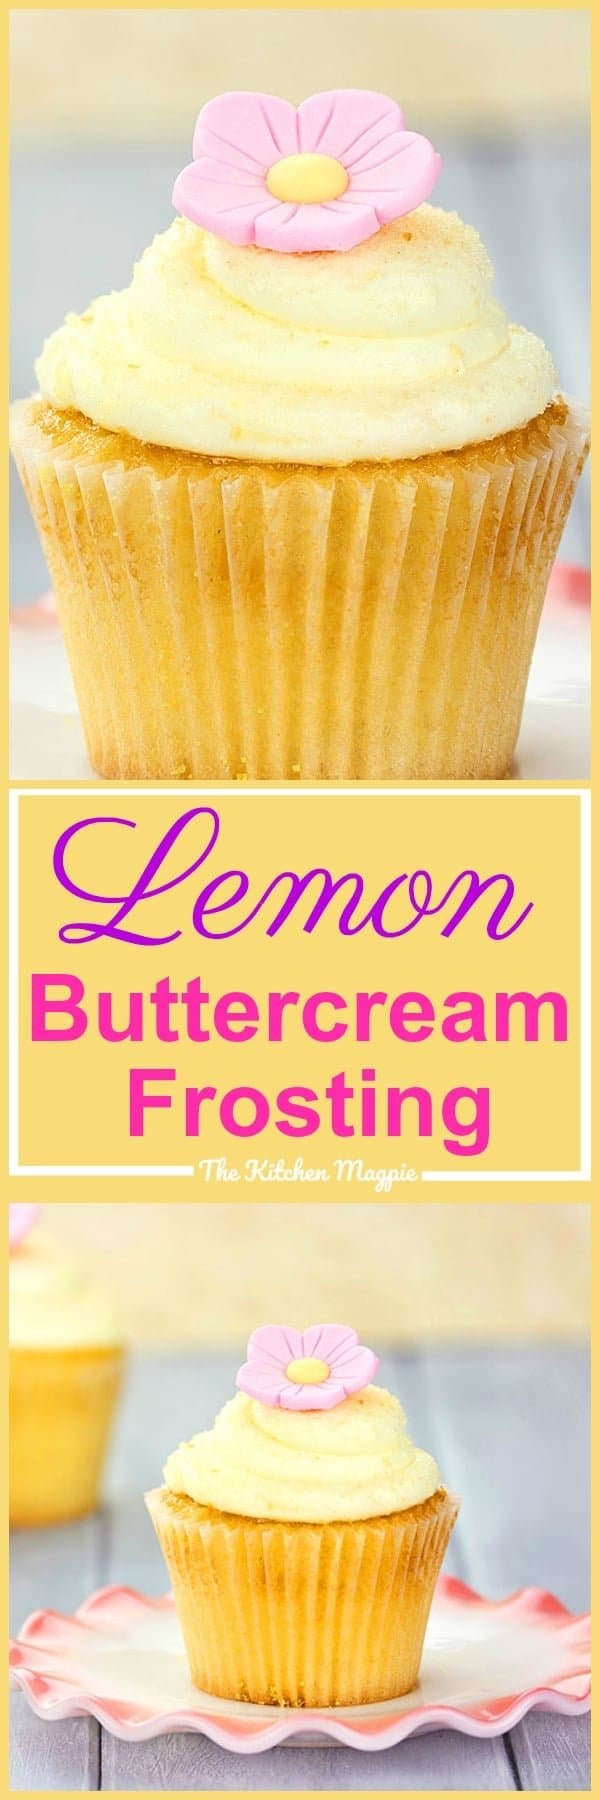 The BEST lemon buttercream frosting ever! One taste of this tart and sweet delight will have you in dessert heaven!